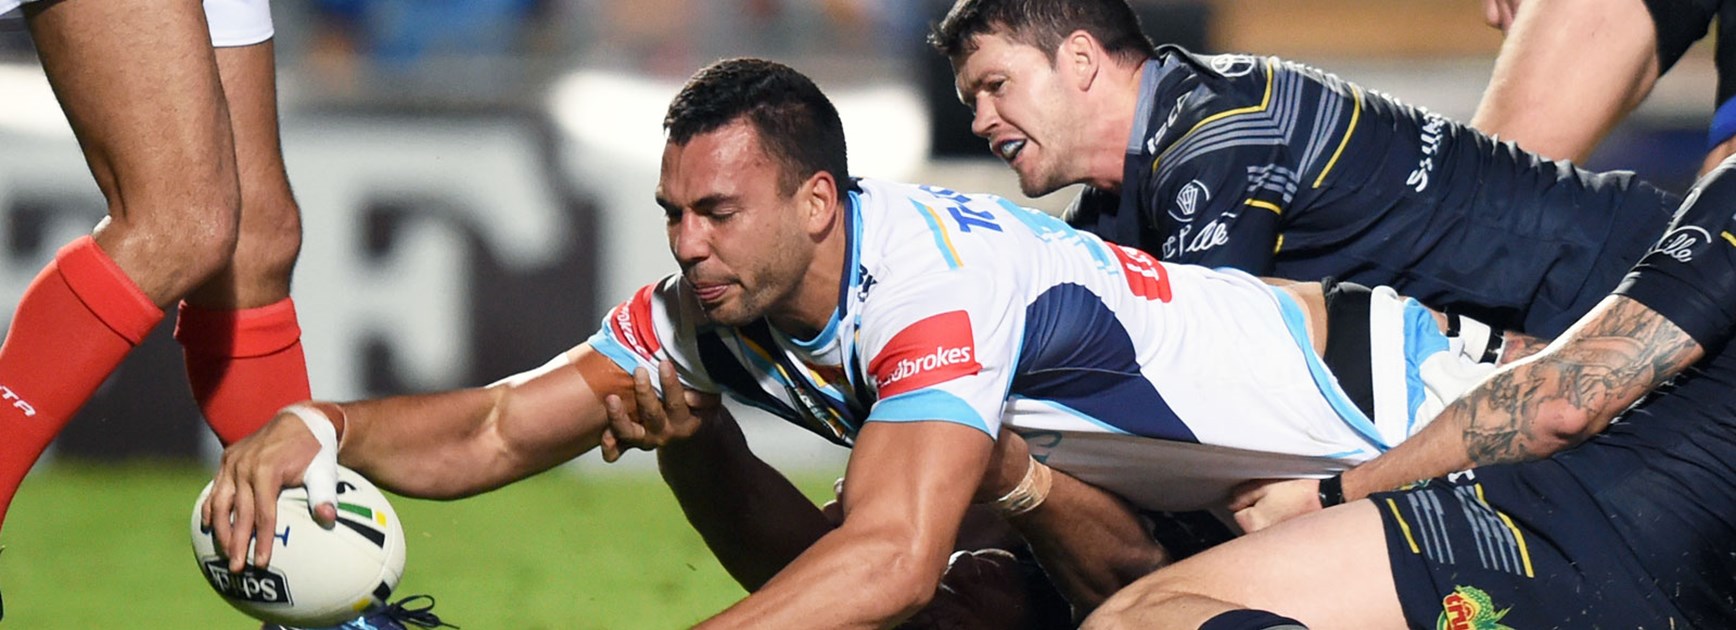 Titans captain Ryan James equalled the record for most tries from a front-rower in a season.